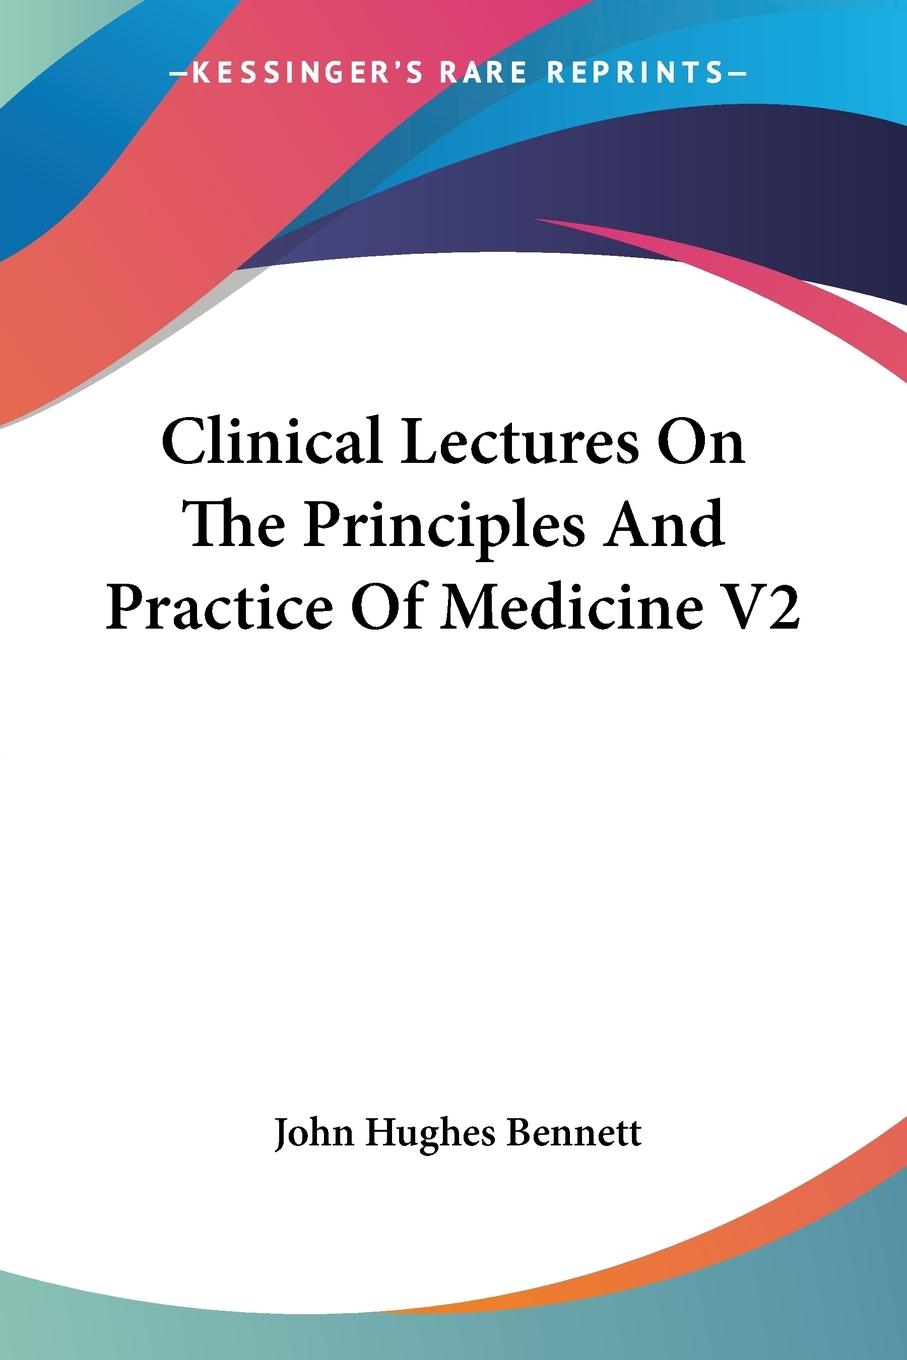 Clinical Lectures On The Principles And Practice Of Medicine V2 - Bennett, John Hughes